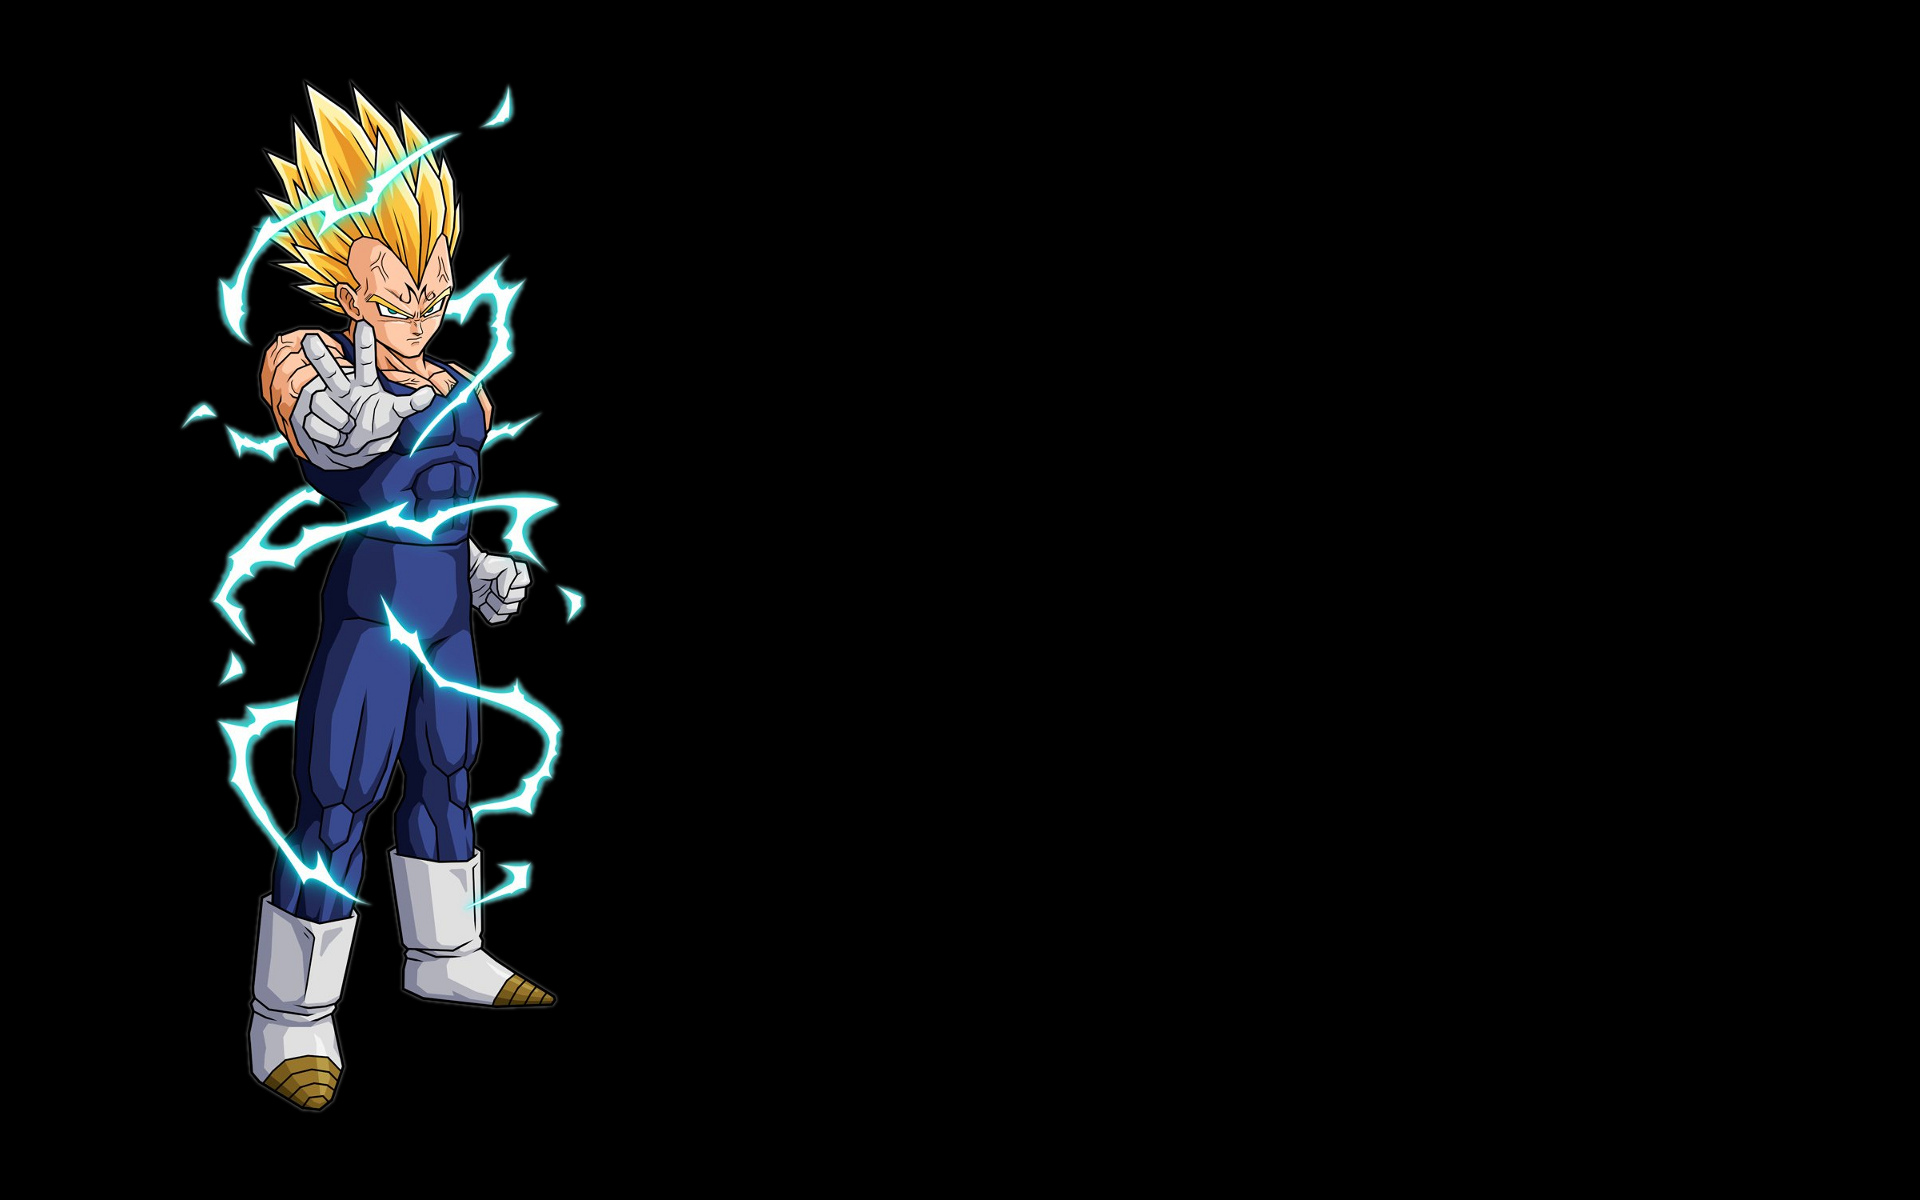 Vegeta Wallpapers High Quality Download 1920x1200